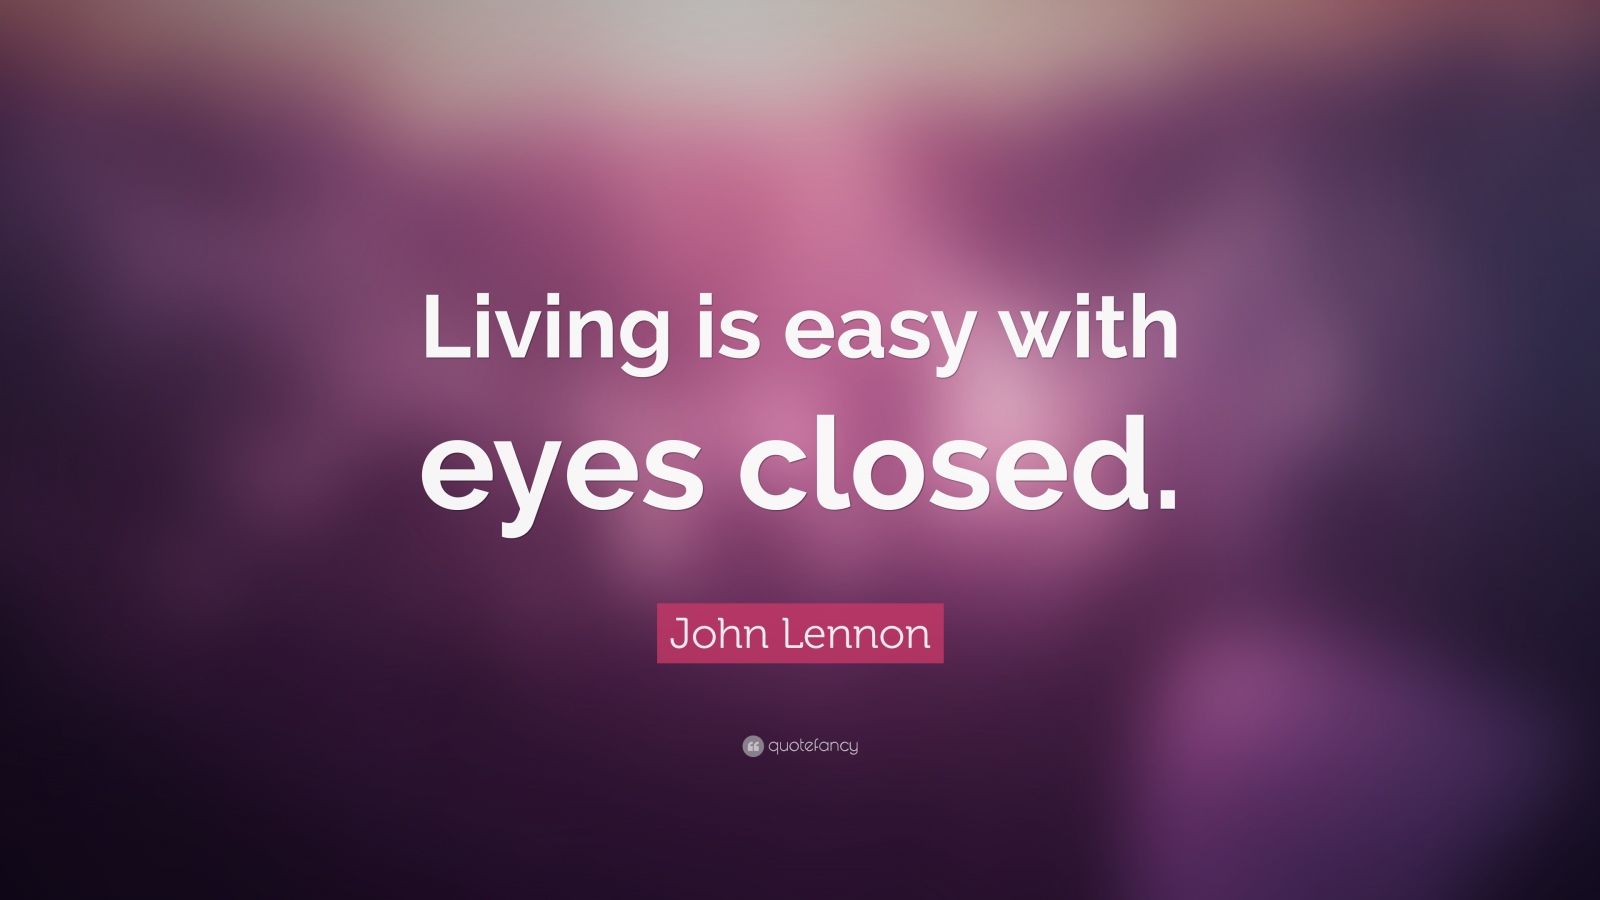 John Lennon Quote: “Living is easy with eyes closed.” (18 wallpapers ...